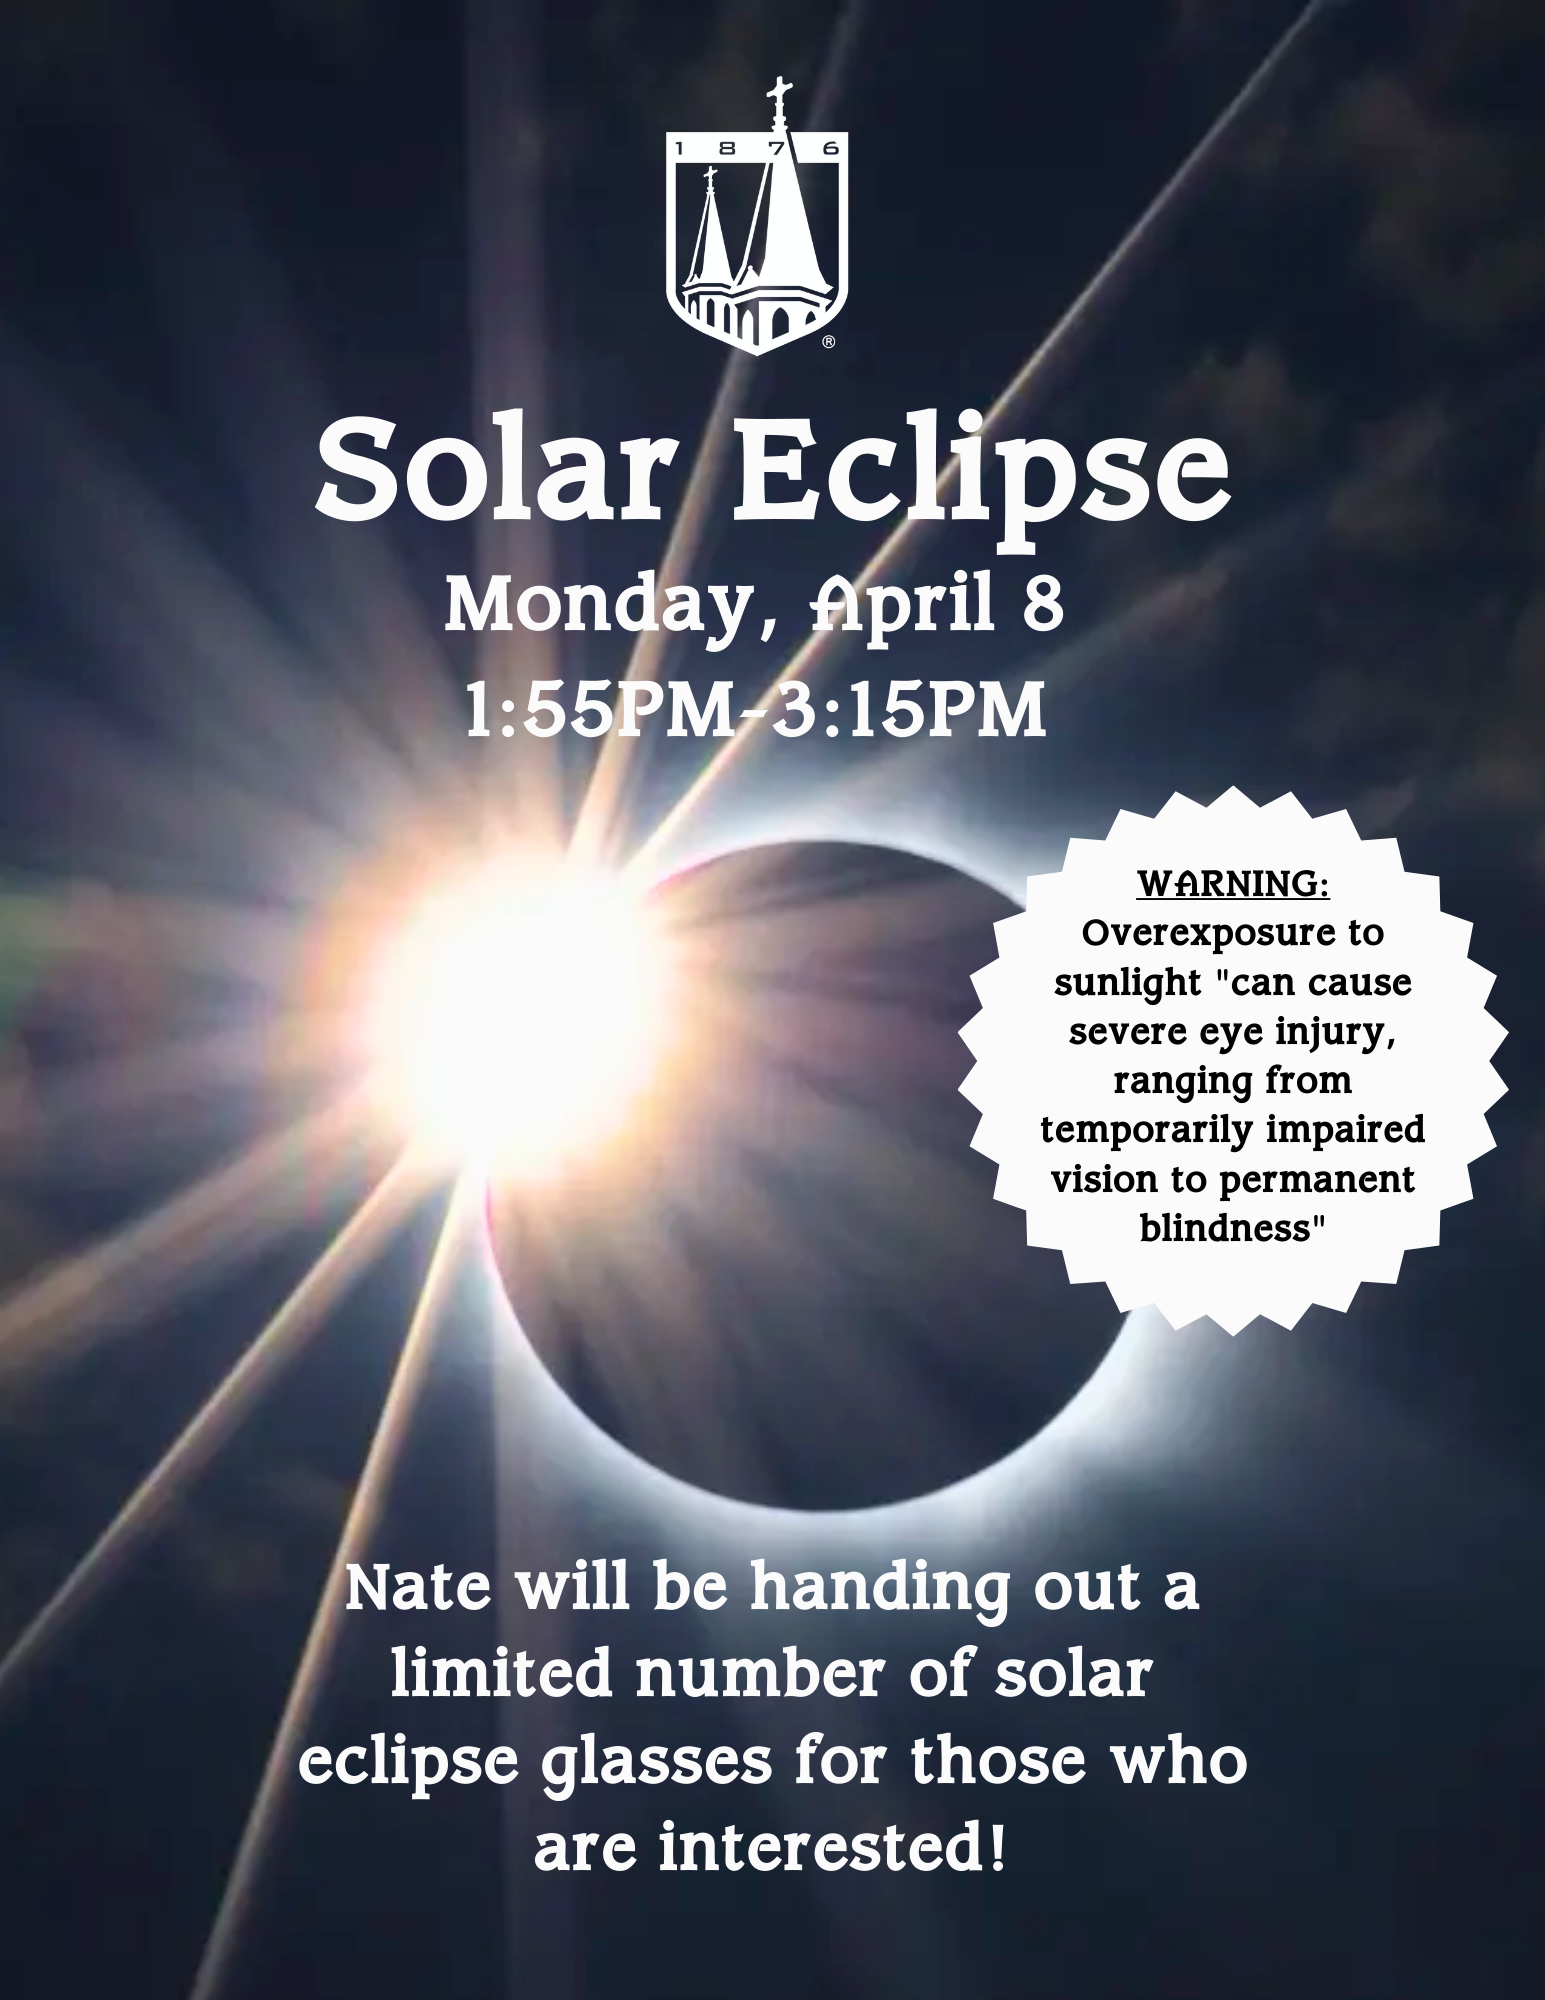 Nate Bolton will be handing out a limited number of solar eclipse glasses for those interested in observing it on Monday afternoon.